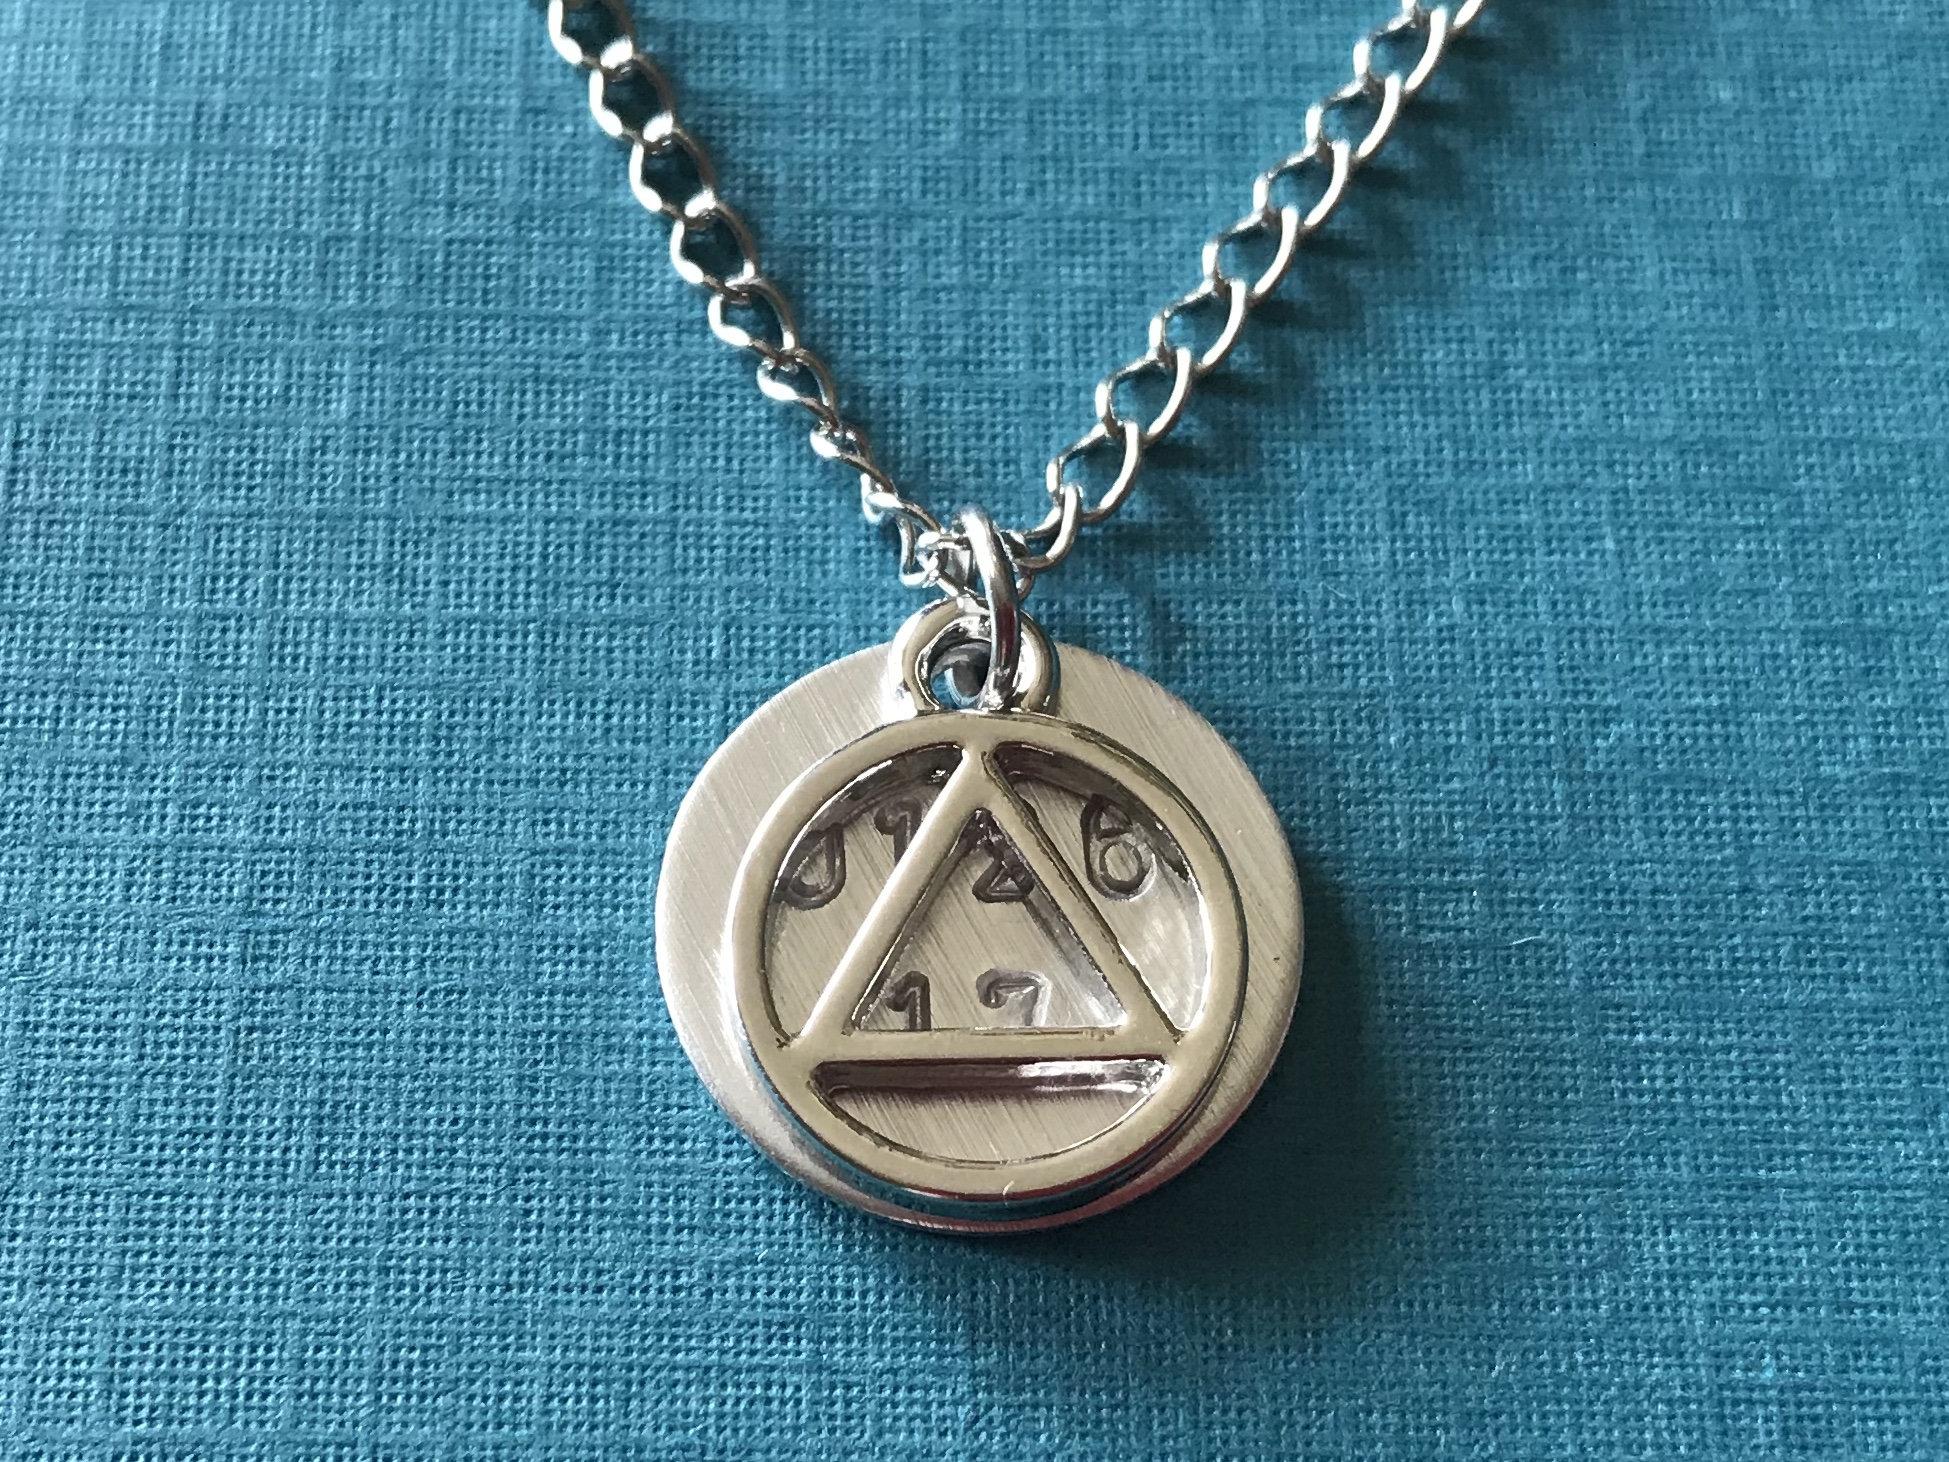 ALCOHOLICS ANONYMOUS AA RECOVERY PENDANT DOG TAG SOLID STAINLESS STEEL NECKLACE